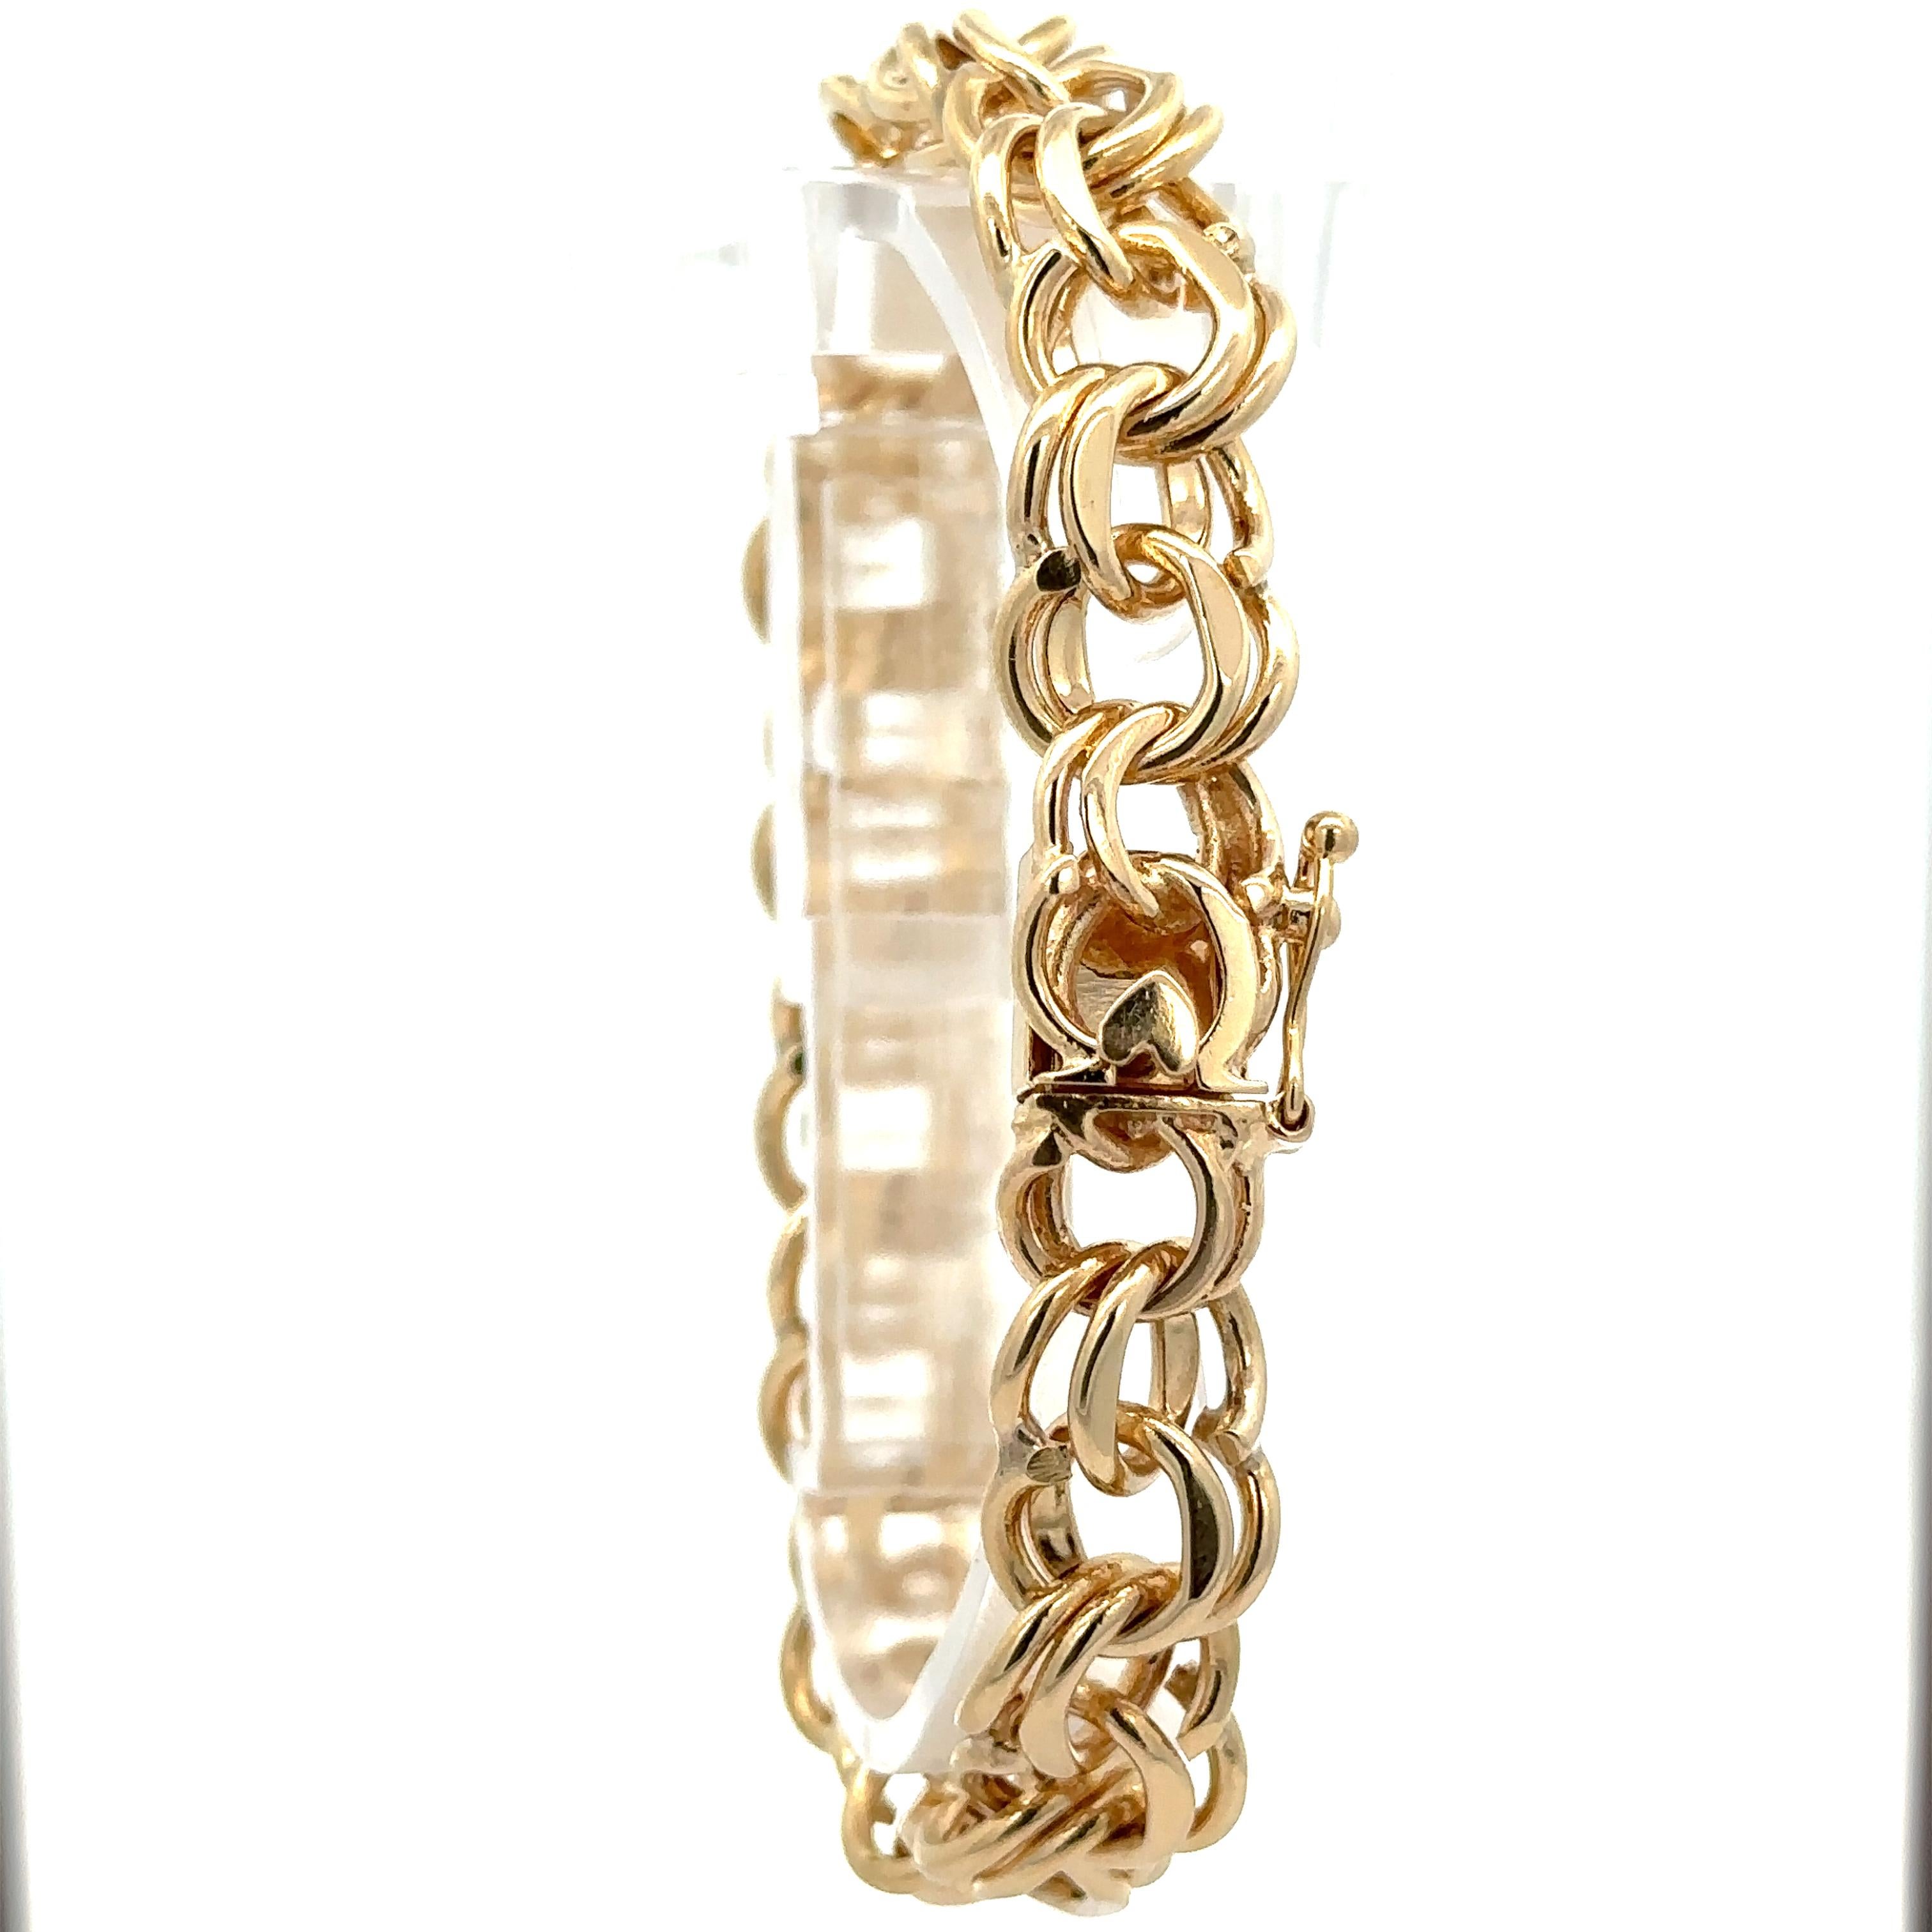 Vintage Solid 14K Yellow Gold 7.5